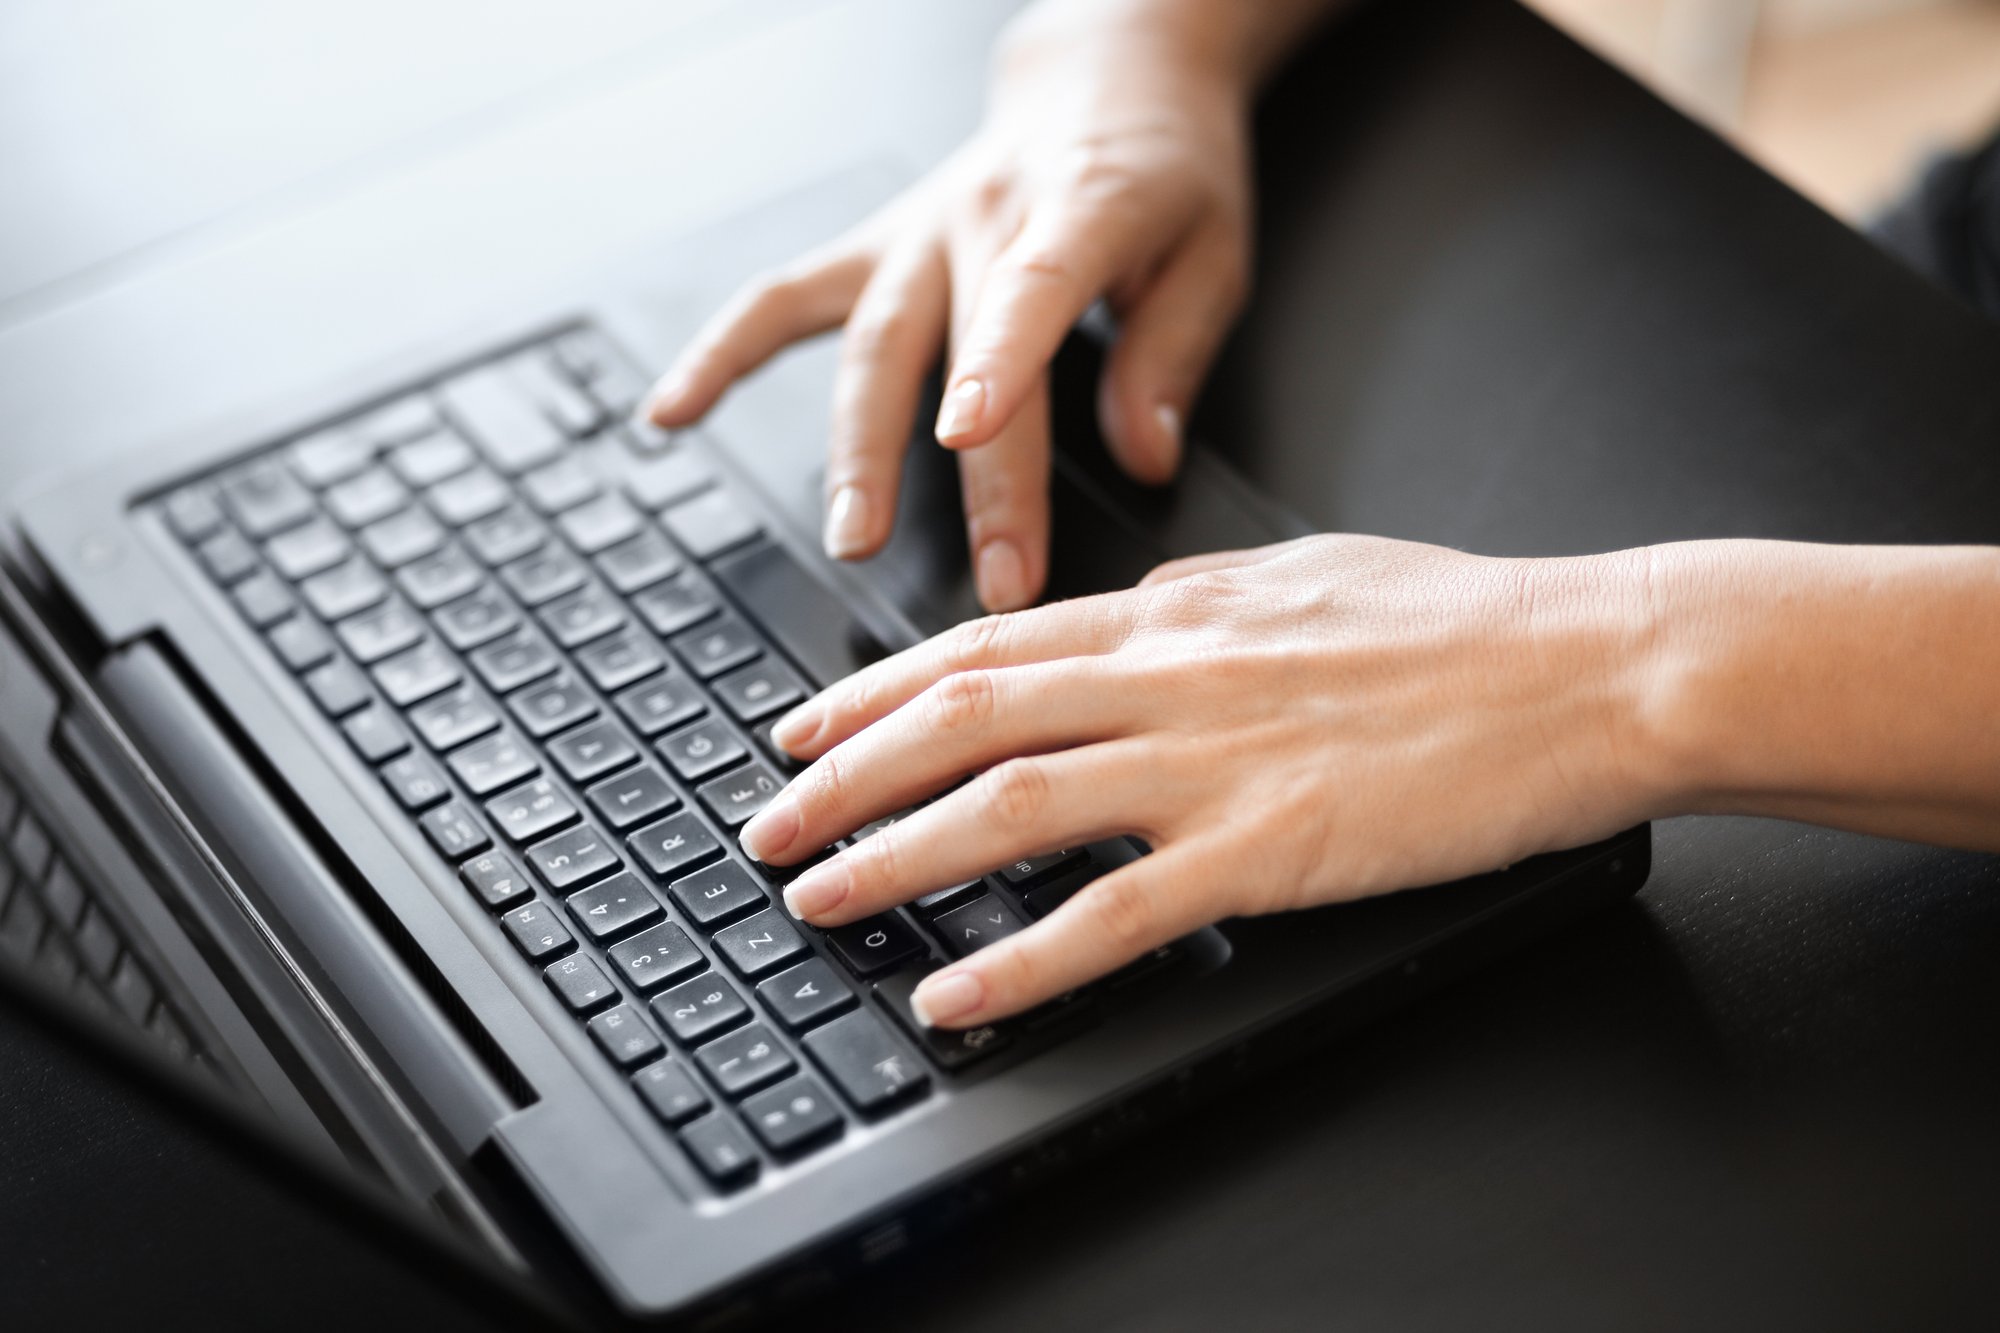 Hands of a Woman Typing on Laptop_Regulatory hosting_file231